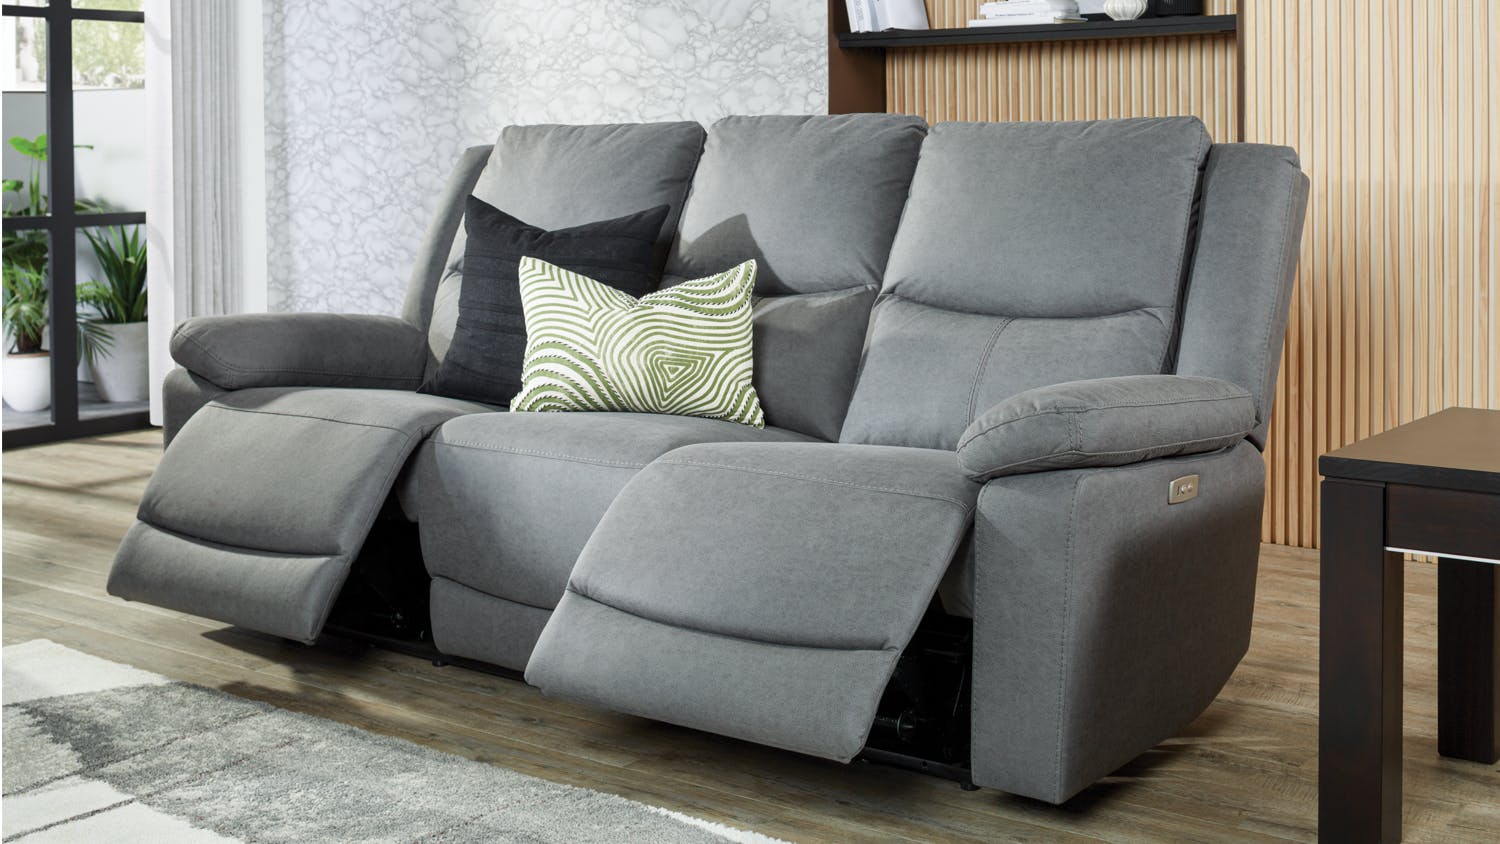 Savoy 3 Seater Fabric Electric Recliner Sofa by Kuka Furniture